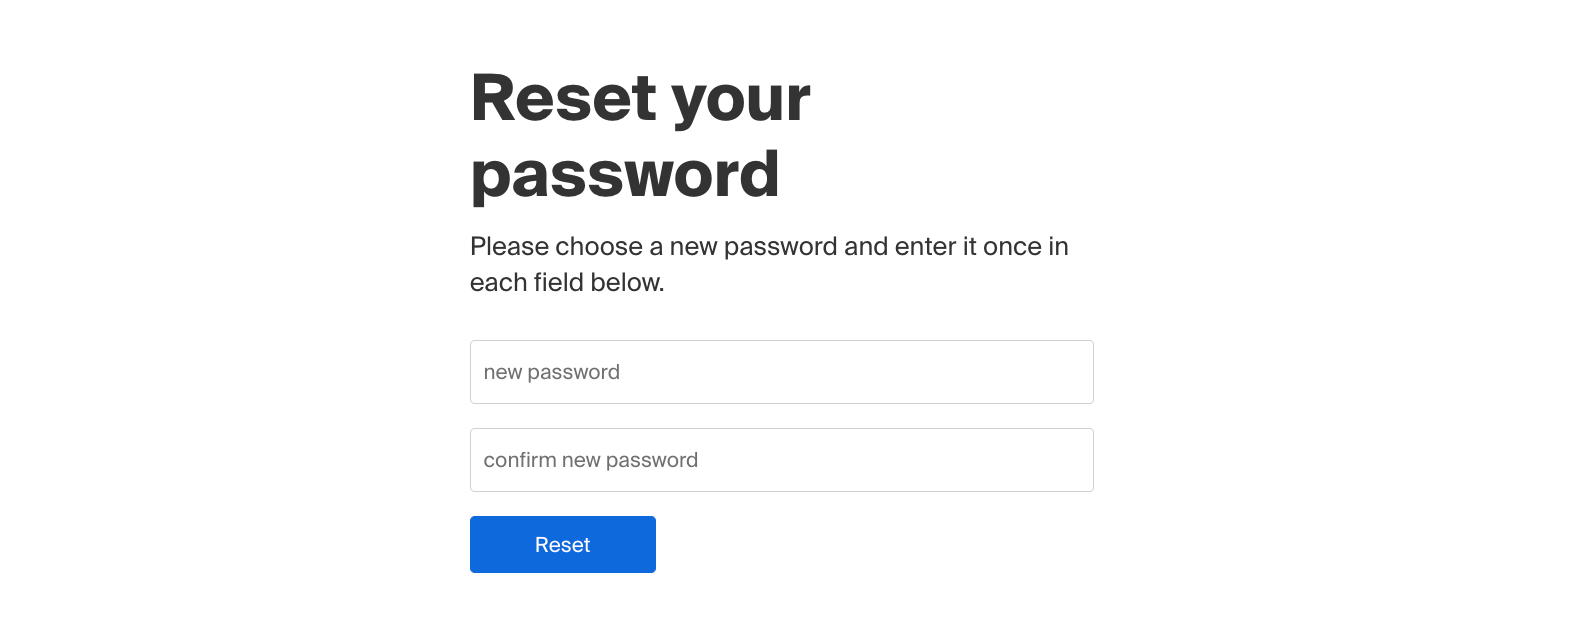 Please_choose_a_new_password.png